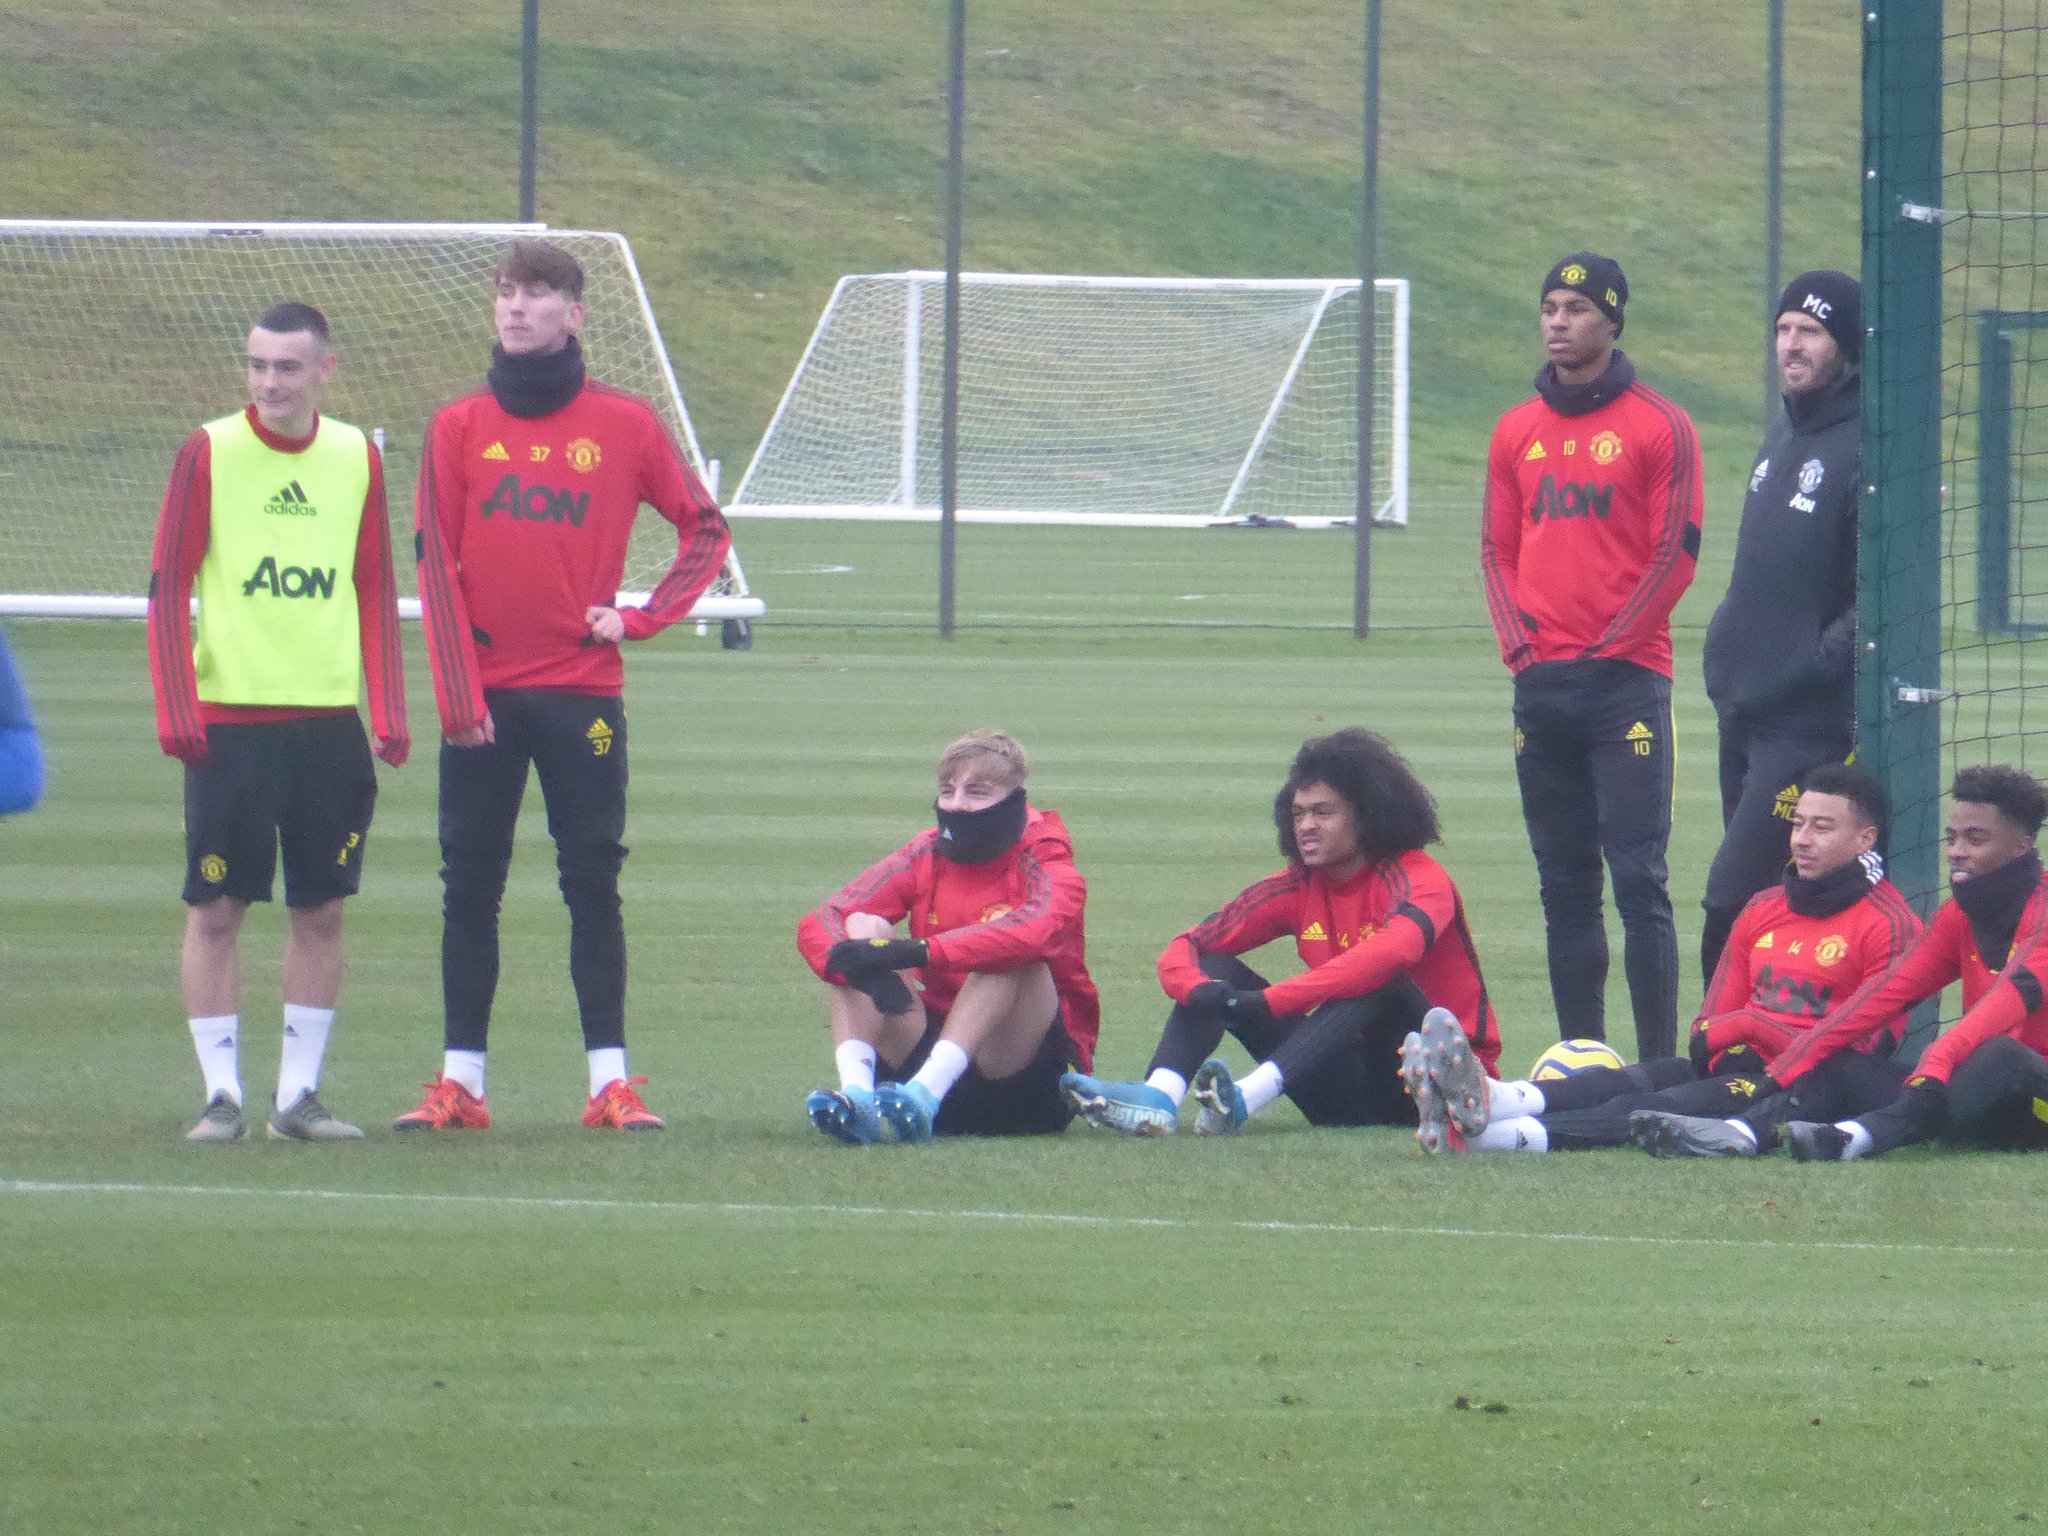 Training ground picture hints at new Manchester United first team squad member Dylan Levitt - Bóng Đá